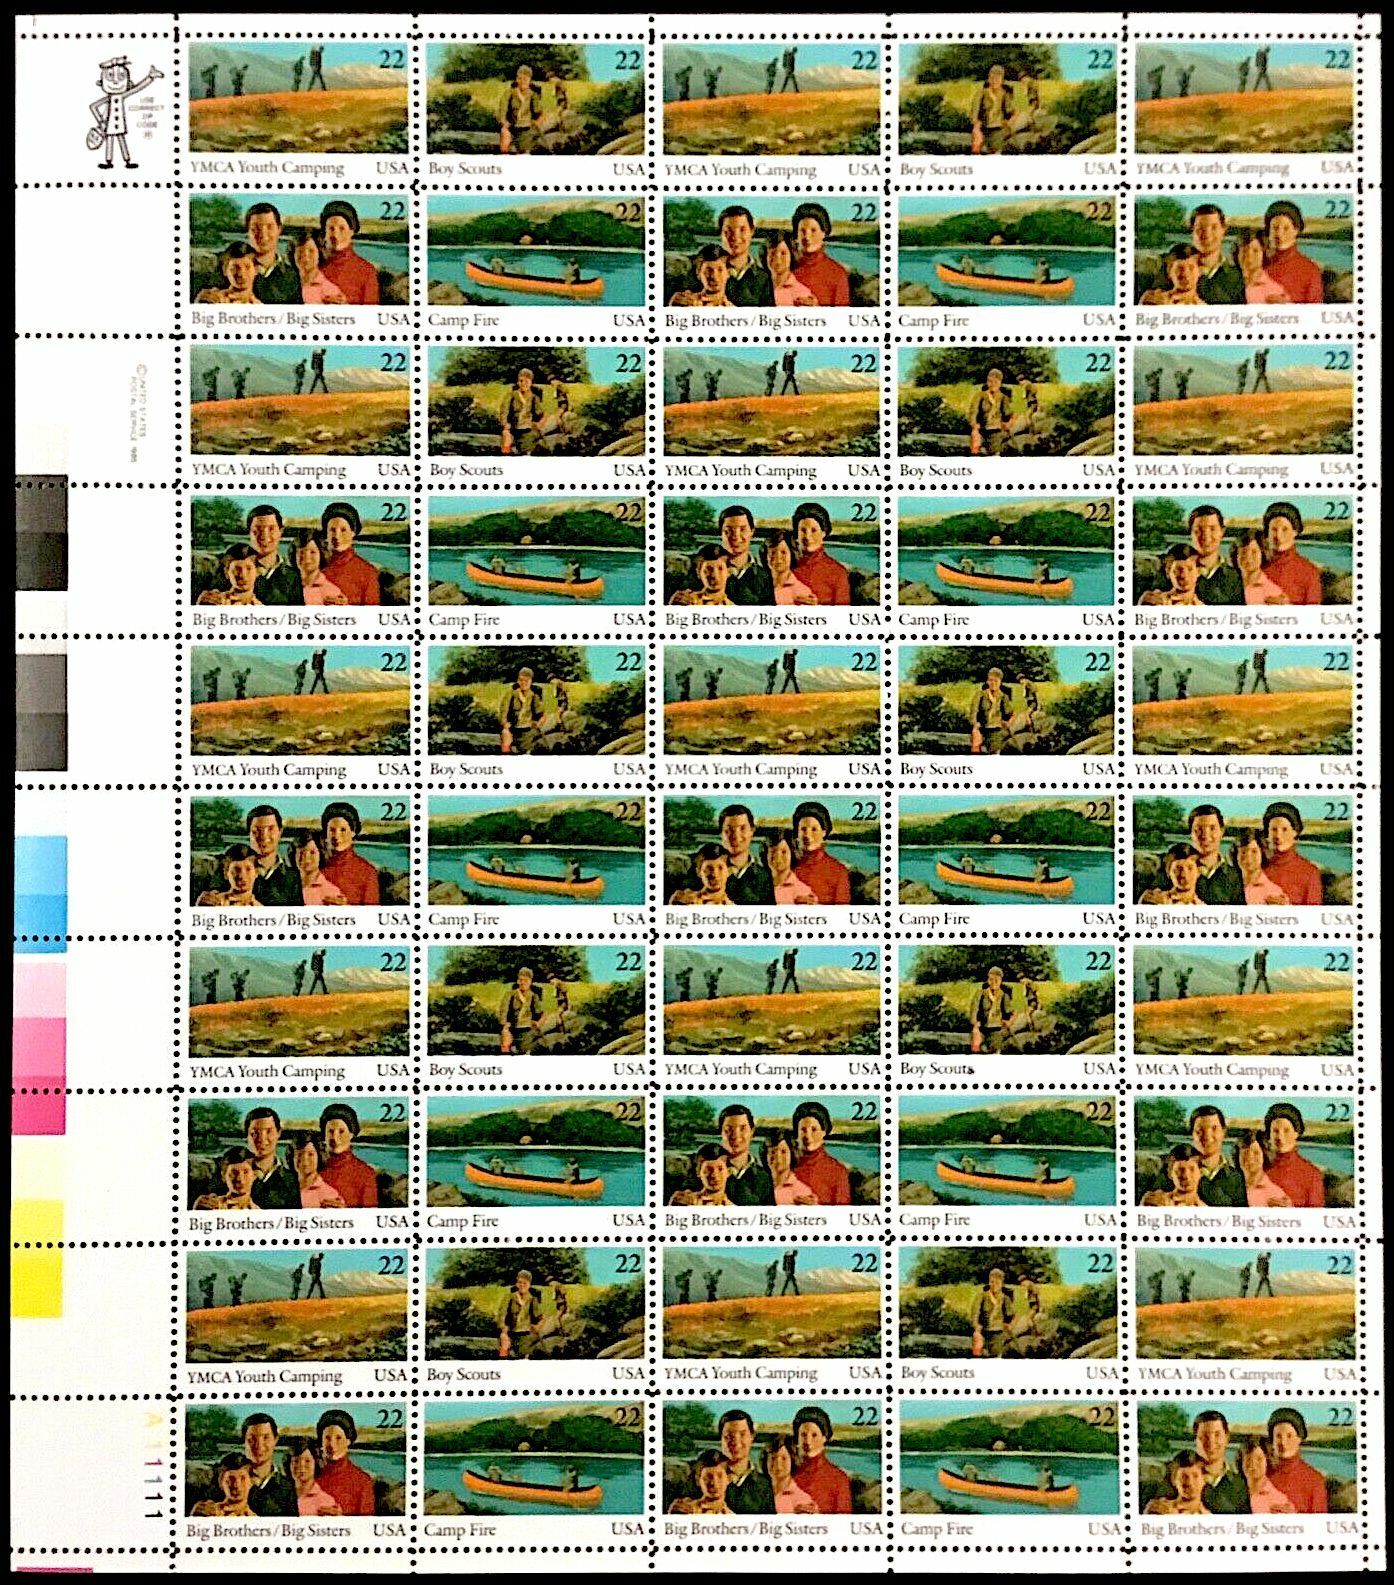 50 Mint INTERNATIONAL YOUTH YEAR STAMPS: Canoeing, Camping, Hiking, Camp Fire Без бренда - фотография #2